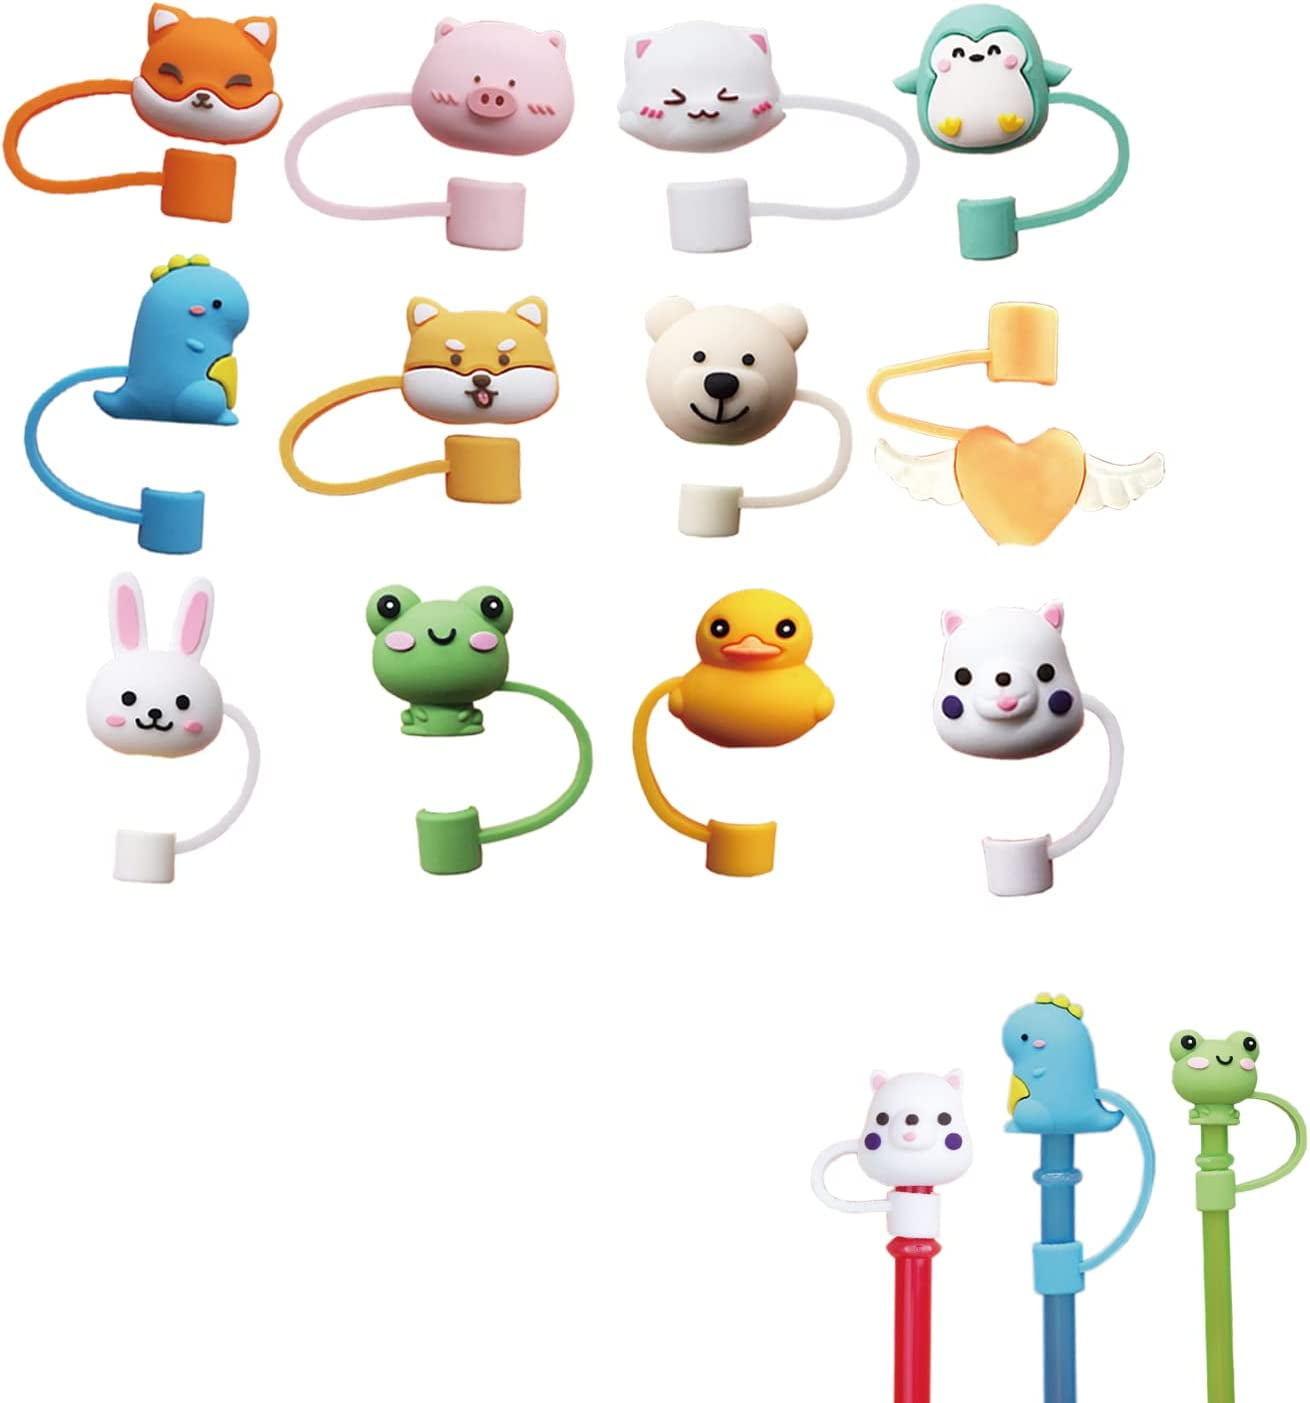 Creative Silicone Straw Tips Cover Reusable Drinking Dust Cap Splash Proof  Plugs Lids Anti Dust Tip Sunflower Cherry Blossom Rainbow Cat Paw For 6 8mm  Straws DD341 From Jamesok, $0.53